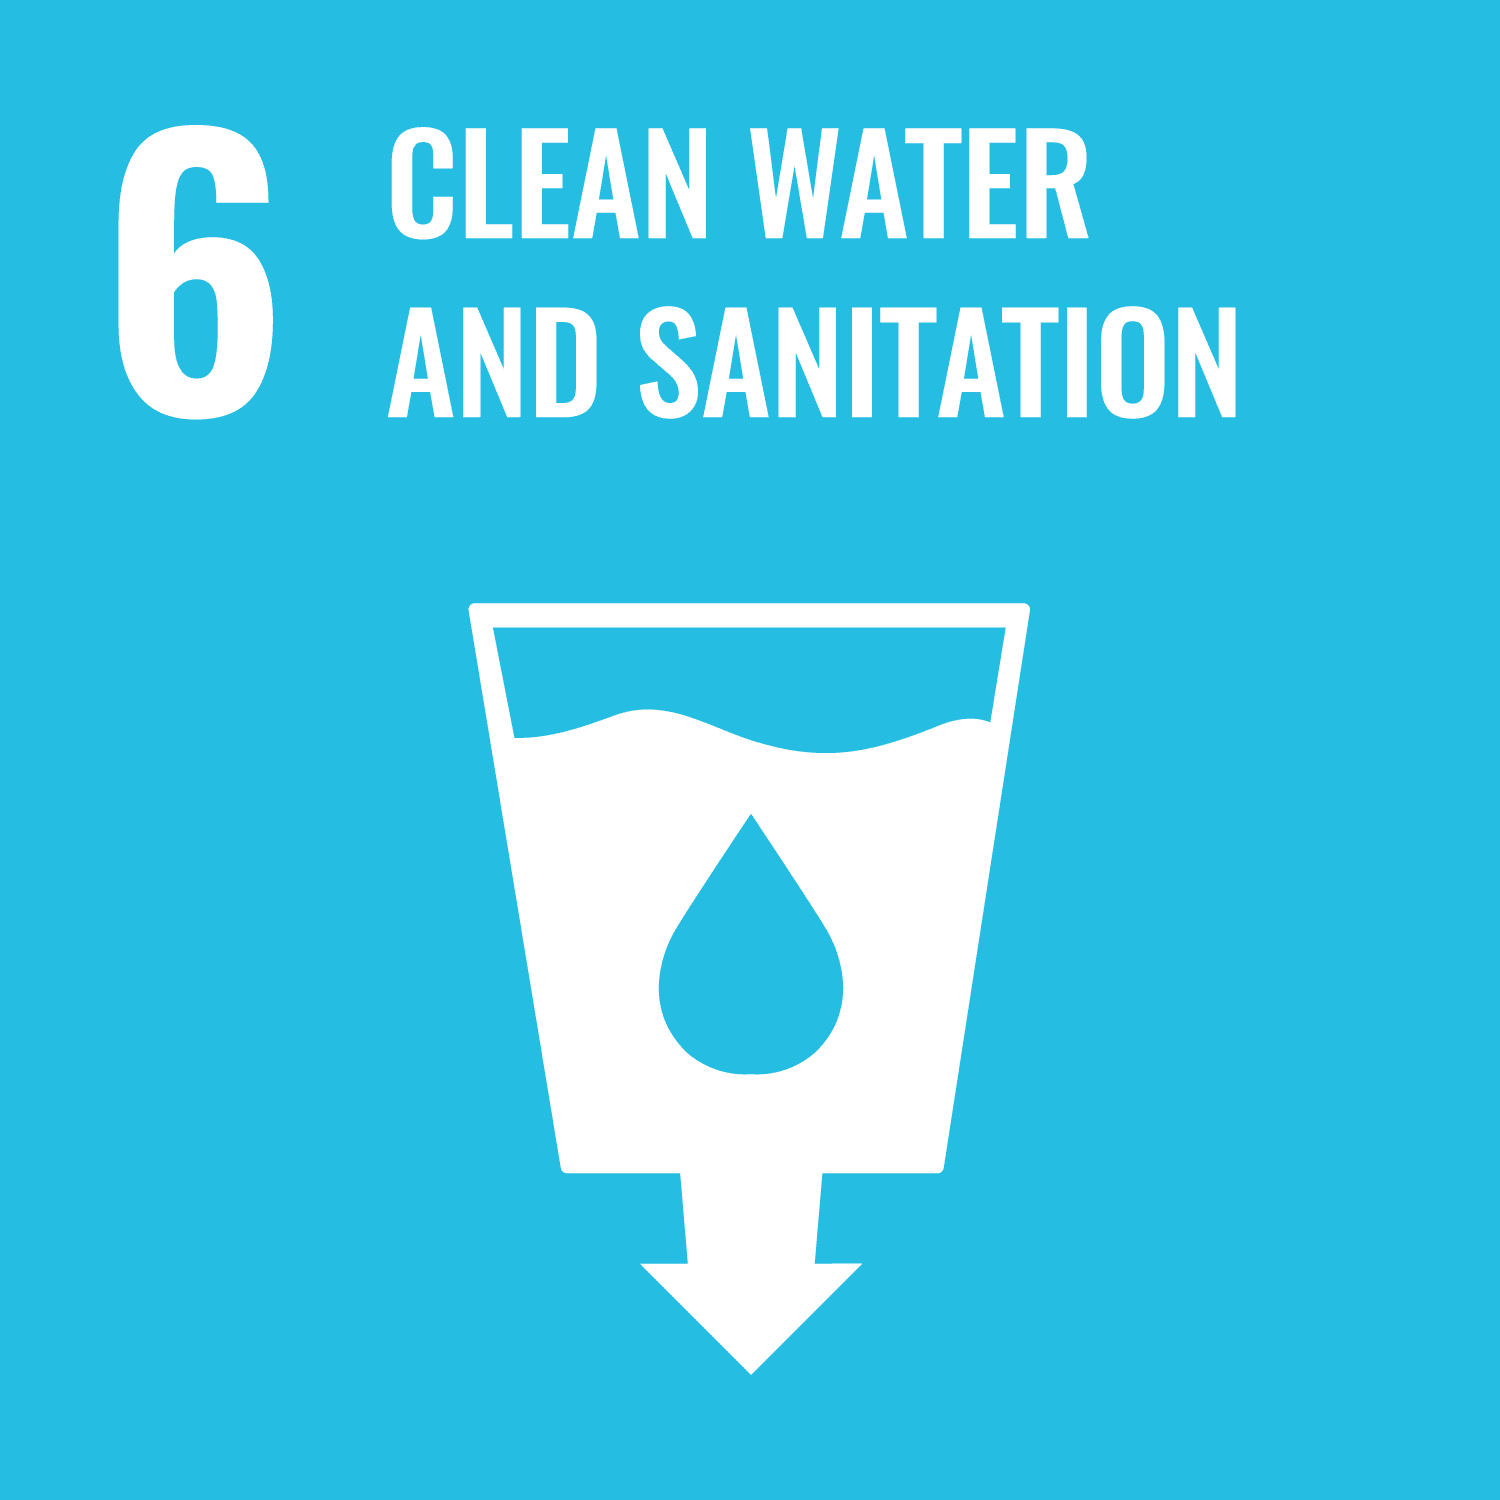 Graphic image of a glass with large drop in the middle with text saying '6 clean water and sanitation' reflecting Sustainable Development Goal (SDG) or Global Goal 6